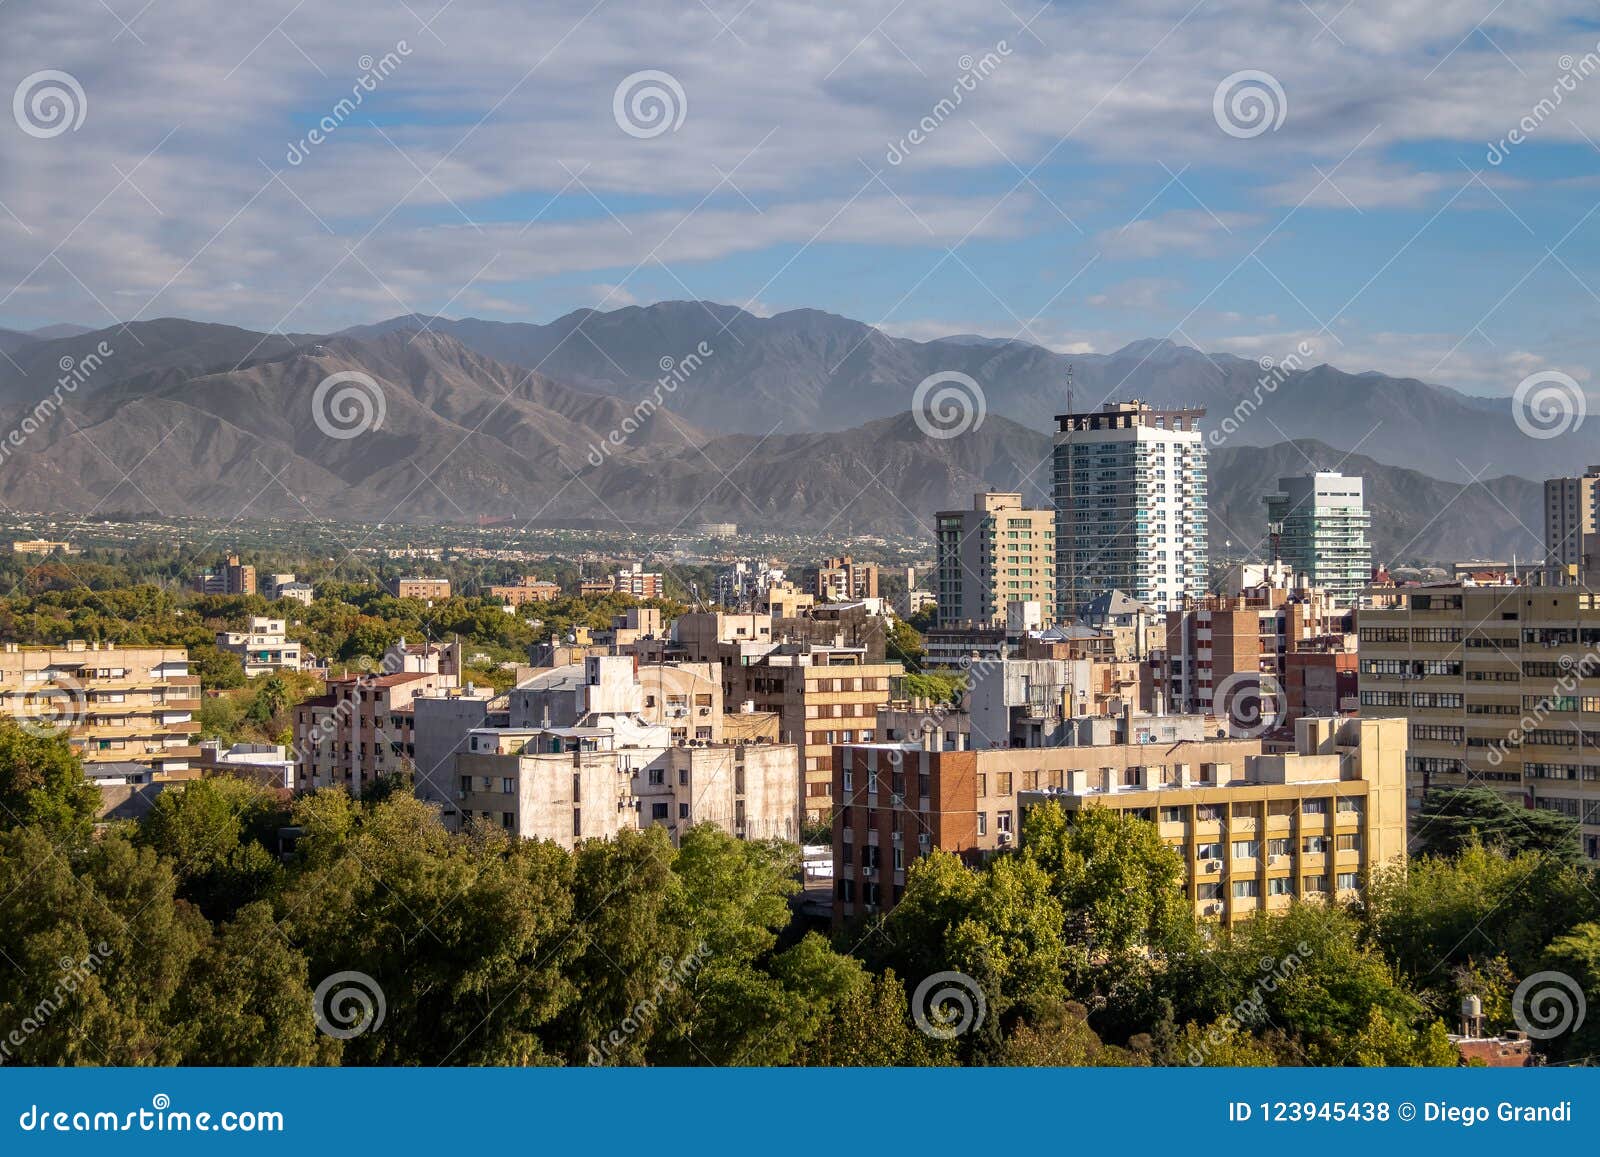 aerial view of mendoza city and andes mountains - mendoza, argentina